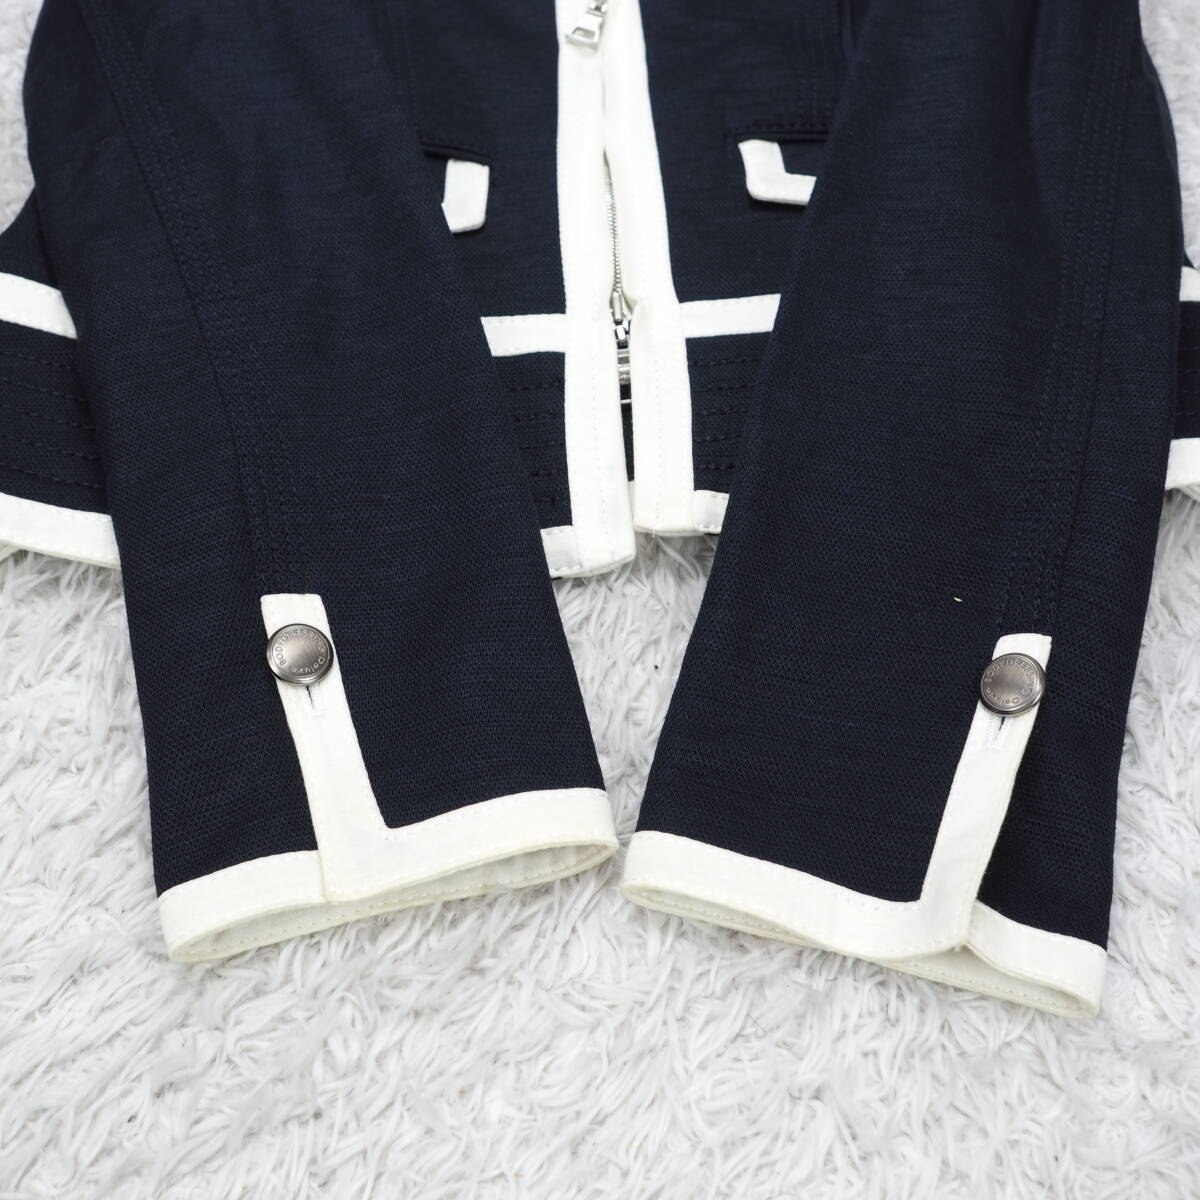 G6967*BODY DRESSING Deluxe body dressing *linen* cotton * no color jacket * navy blue navy white white *38